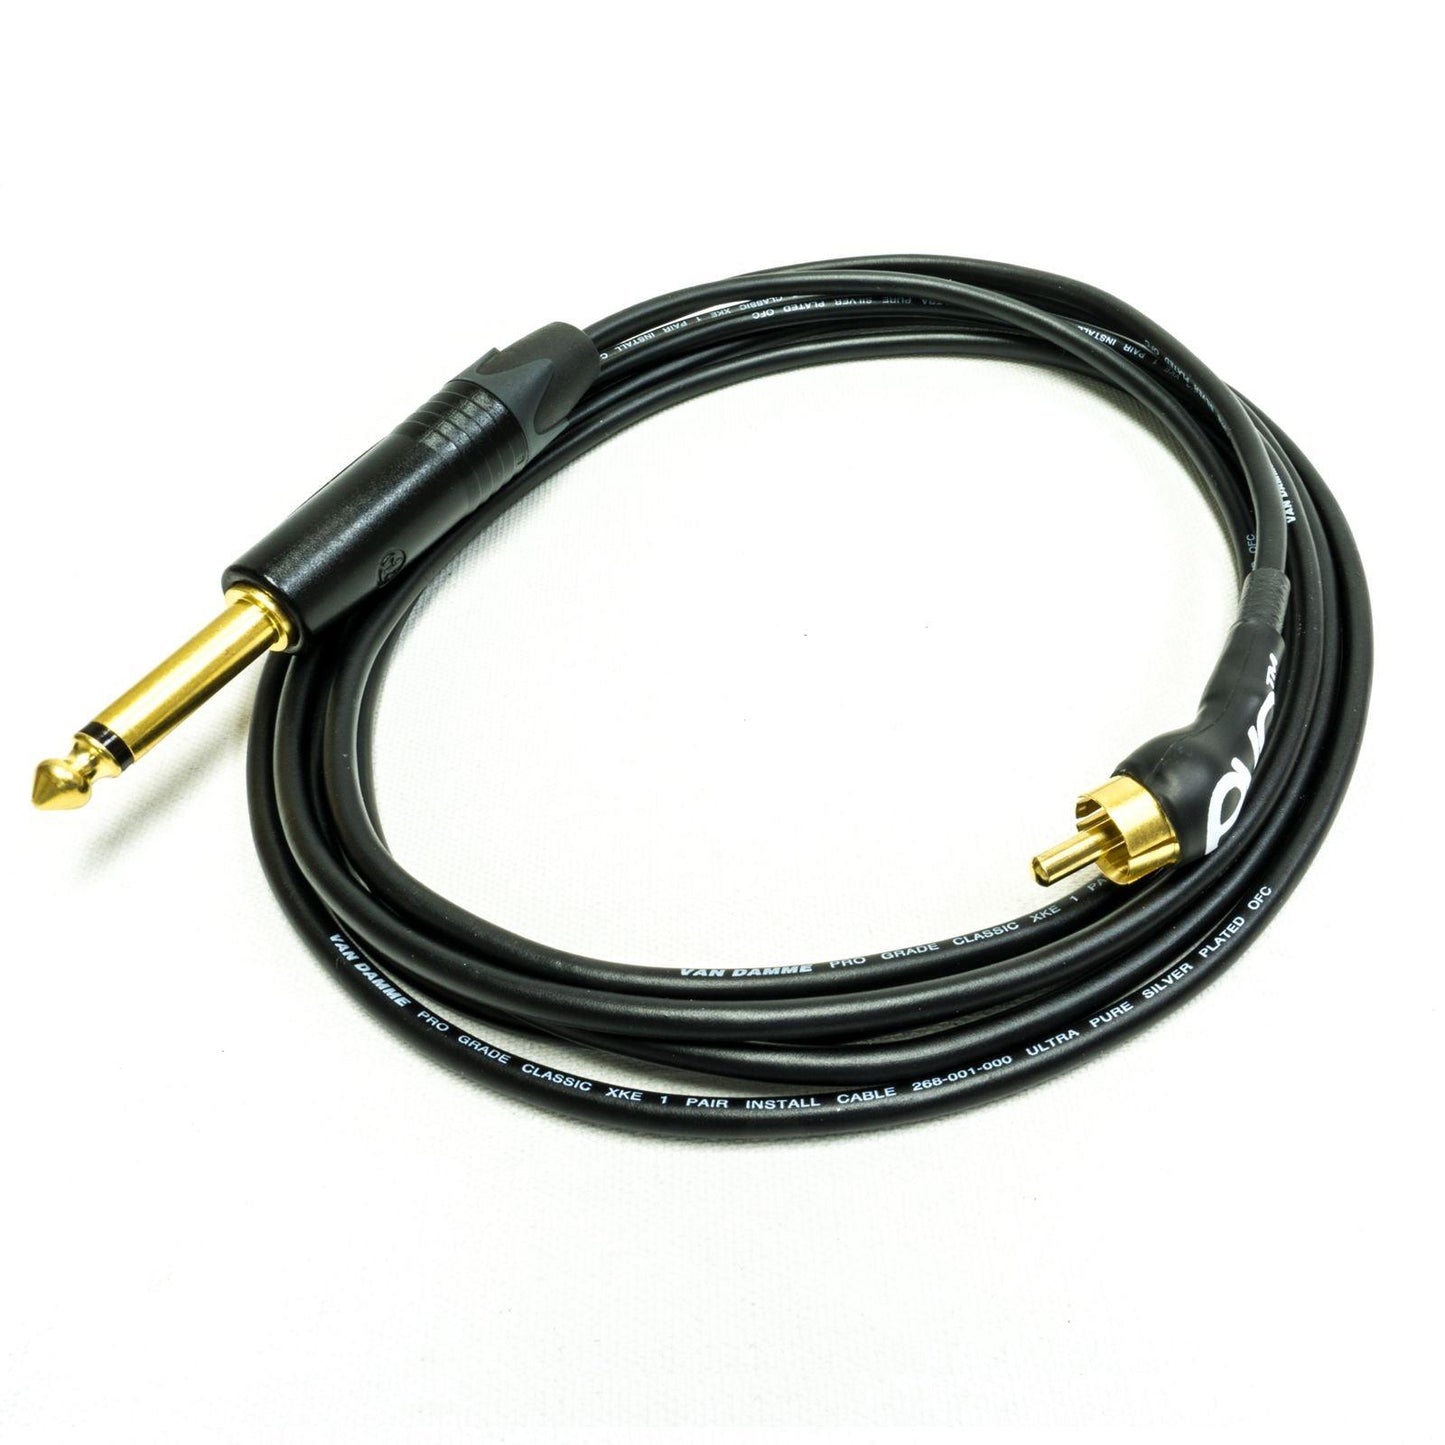 Evolution Mazikeen Tattoo Cord. 45 Degree, RCA to Jack Cable